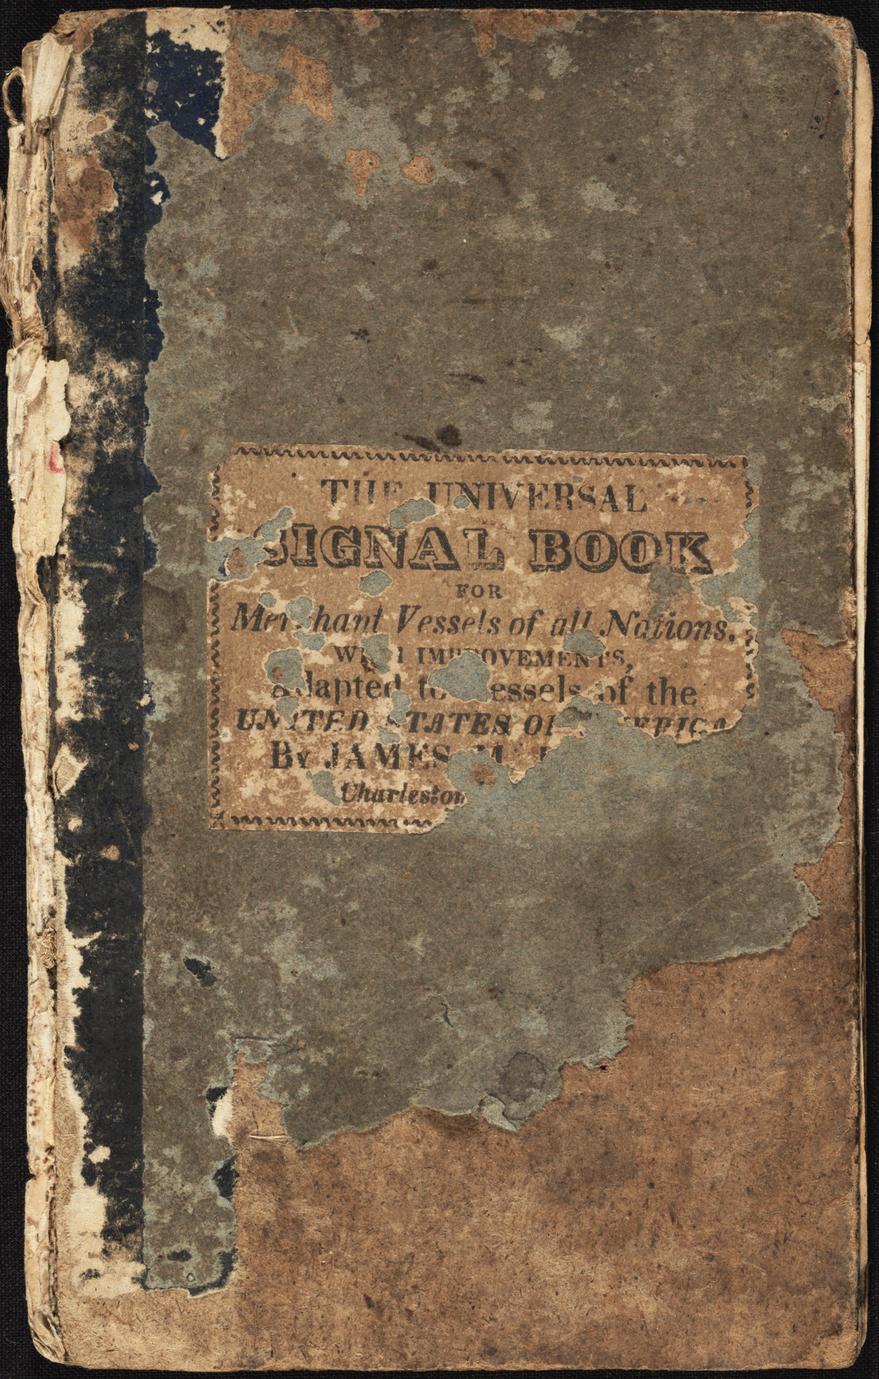 The universal signal book : containing a complete code of signals for the use of merchants' ships of all nations